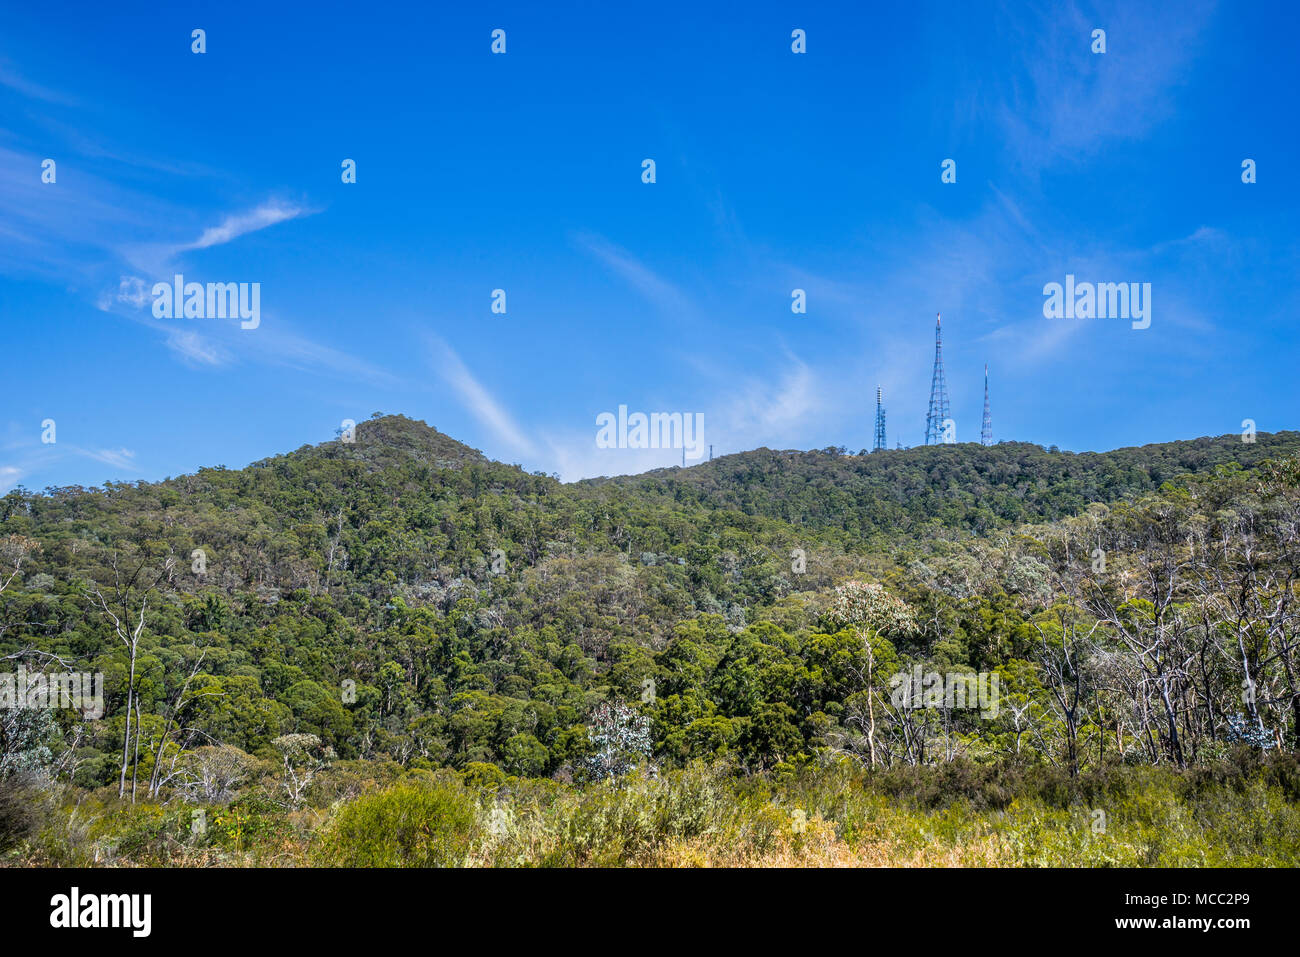 Transmission towers at the summit of 1,390 m Mount Canobolas, a mountain on a spur of the Great Dividing Range in the Central Tablelands region of New Stock Photo